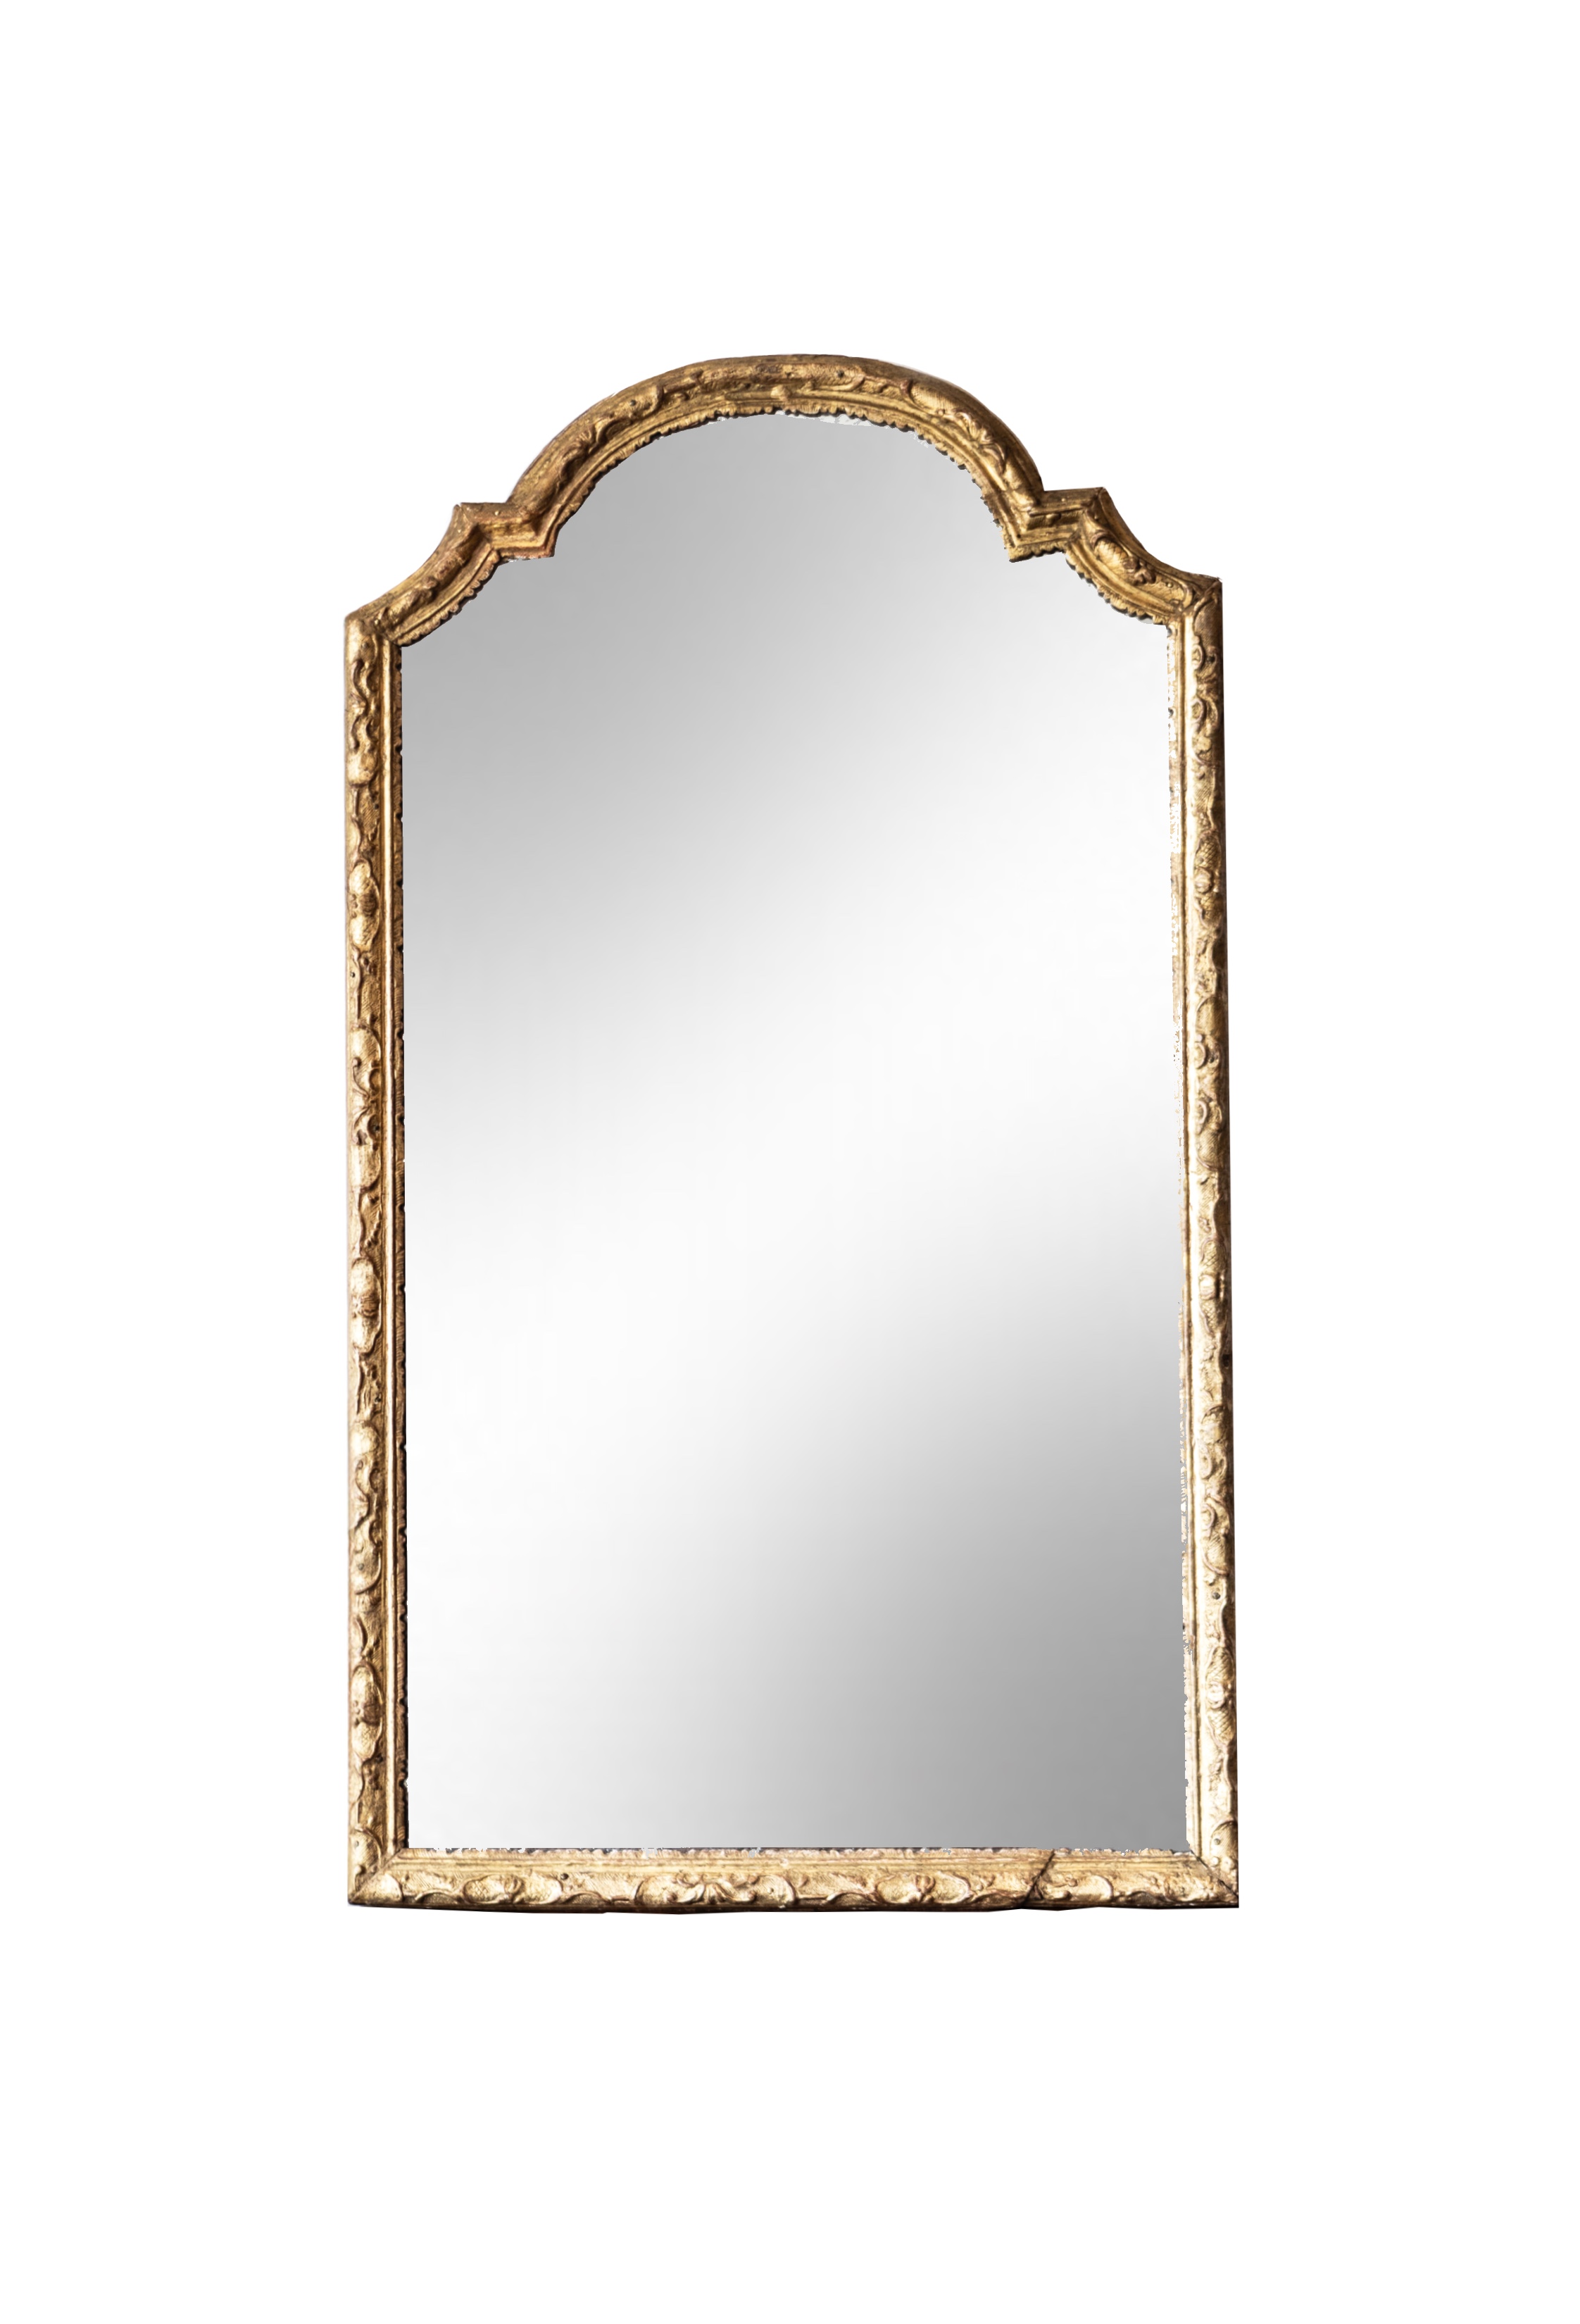 SOLD - Early 18th Century French Louis XIV Mirror